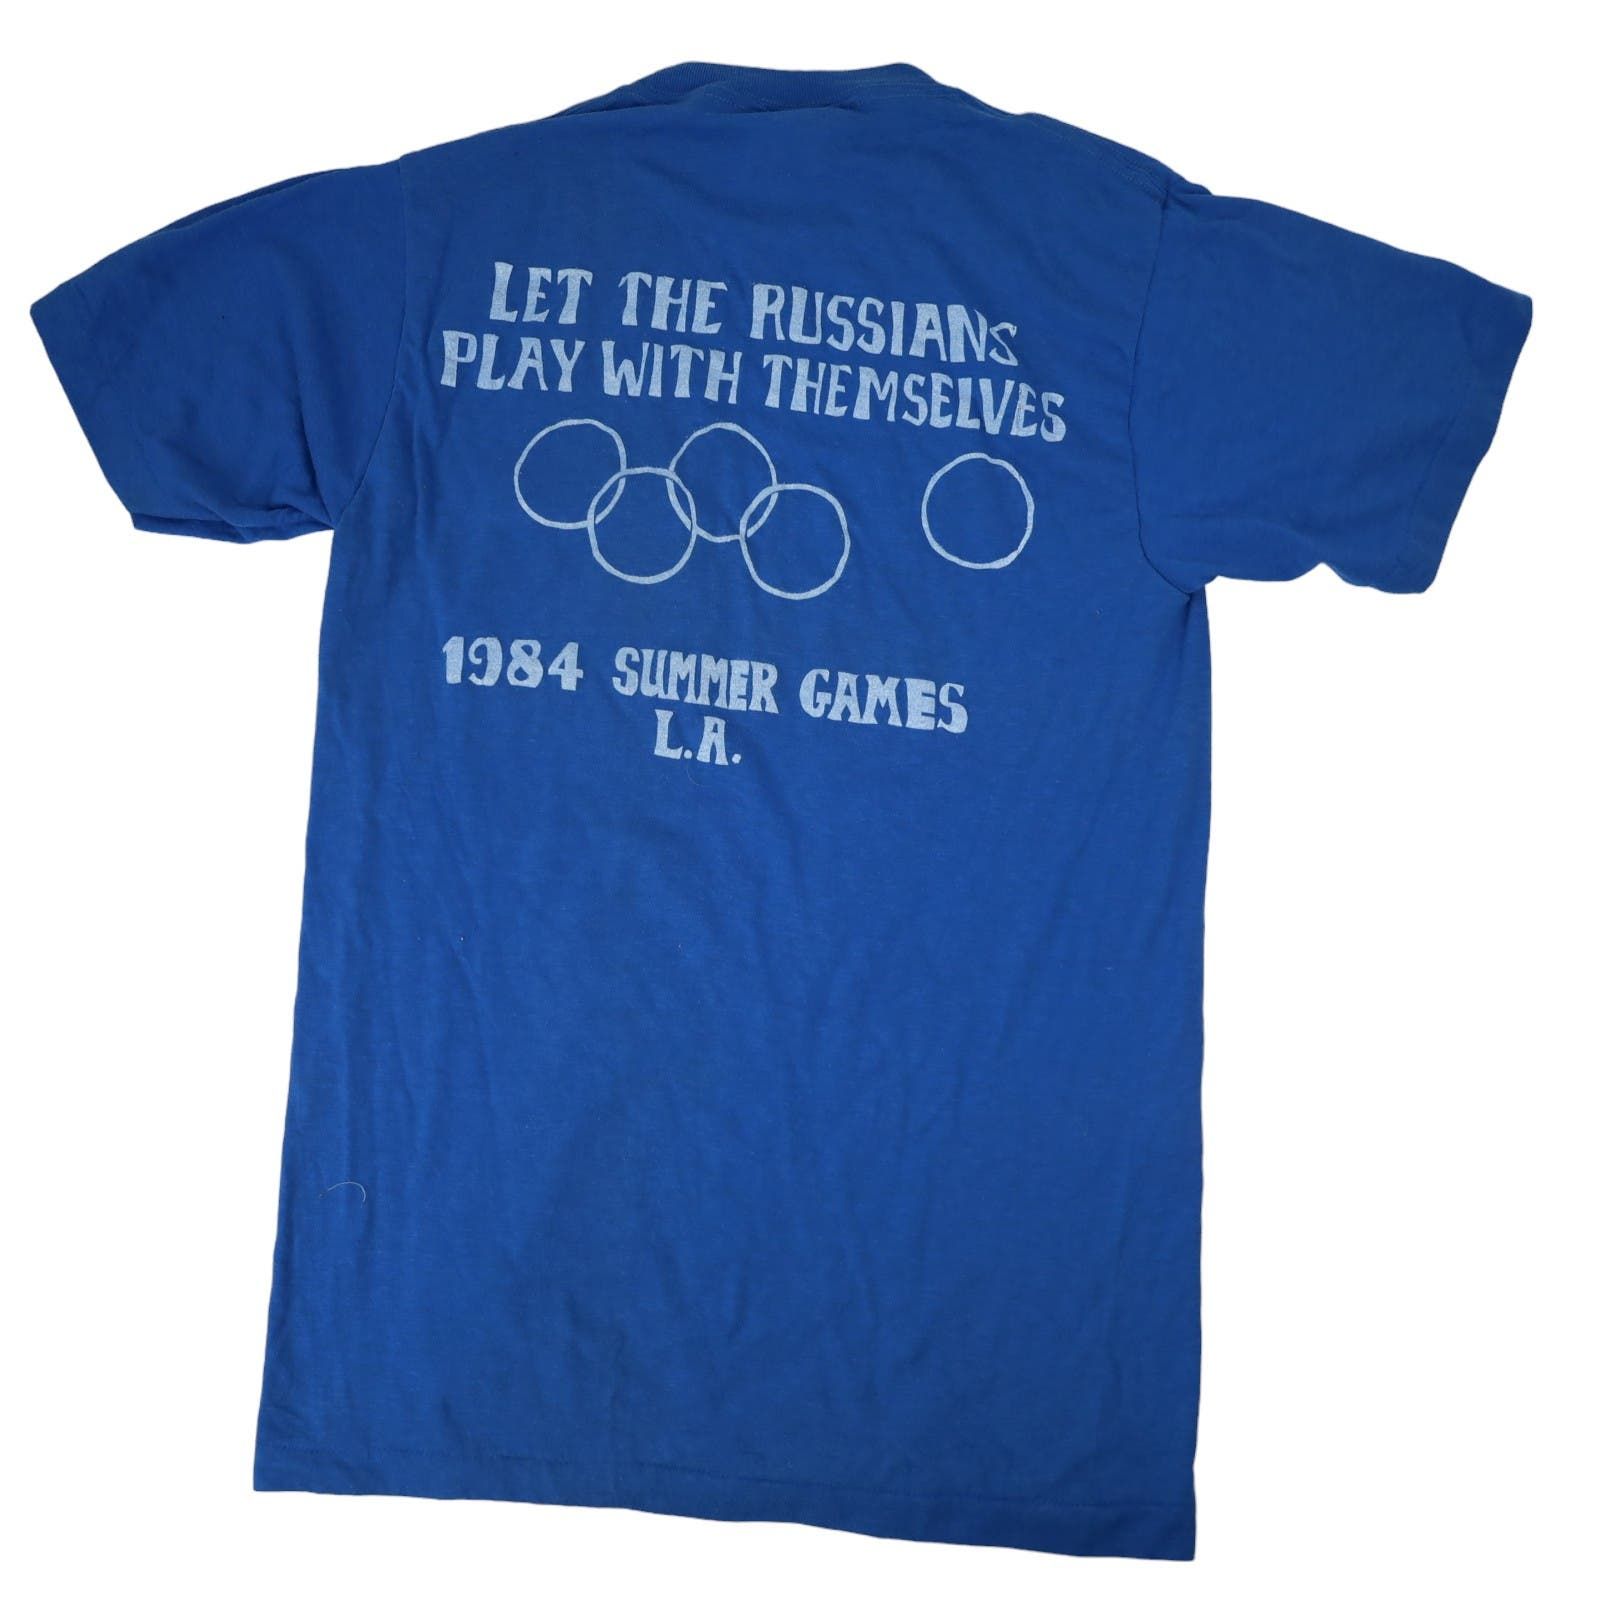 Vintage Vintage Summer Games "Let the Russians Play With Themselves" Size US M / EU 48-50 / 2 - 1 Preview